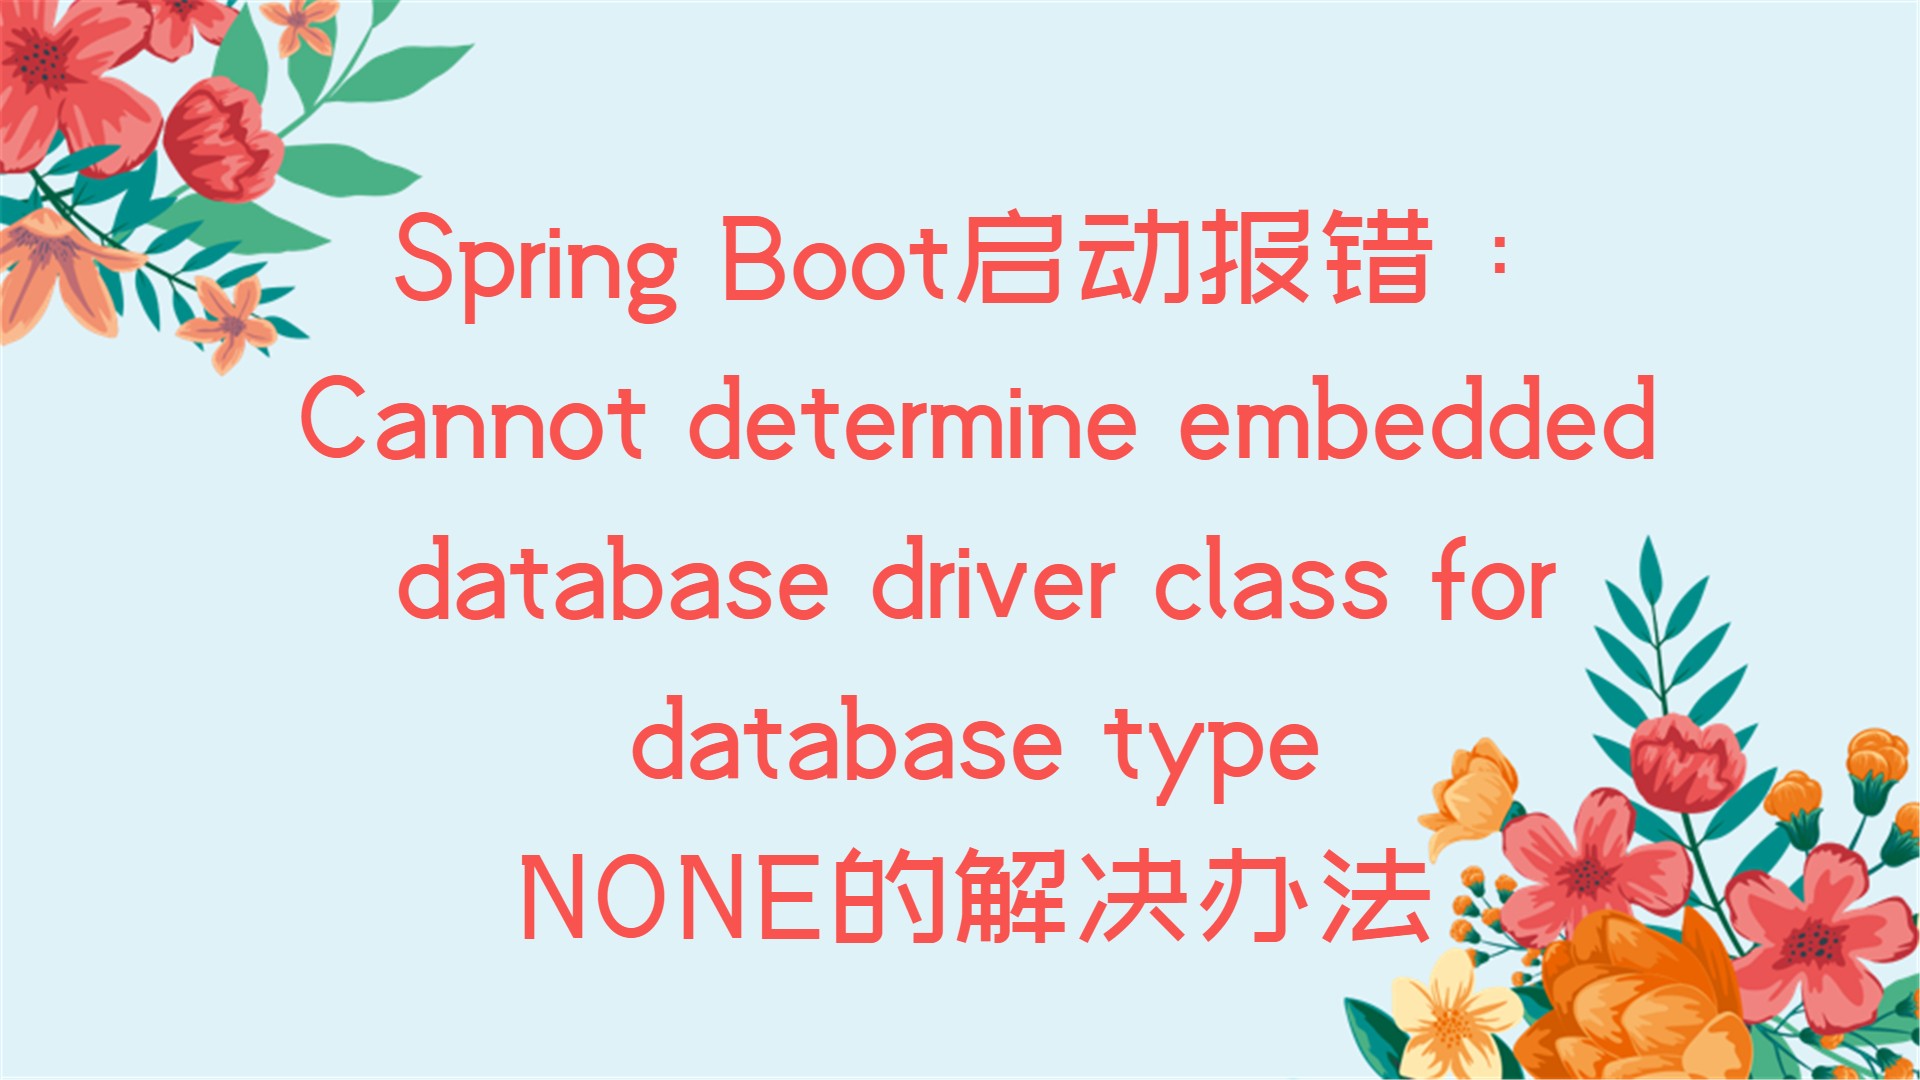 Spring Boot启动报错：Cannot determine embedded database driver class for database type NONE的解决办法